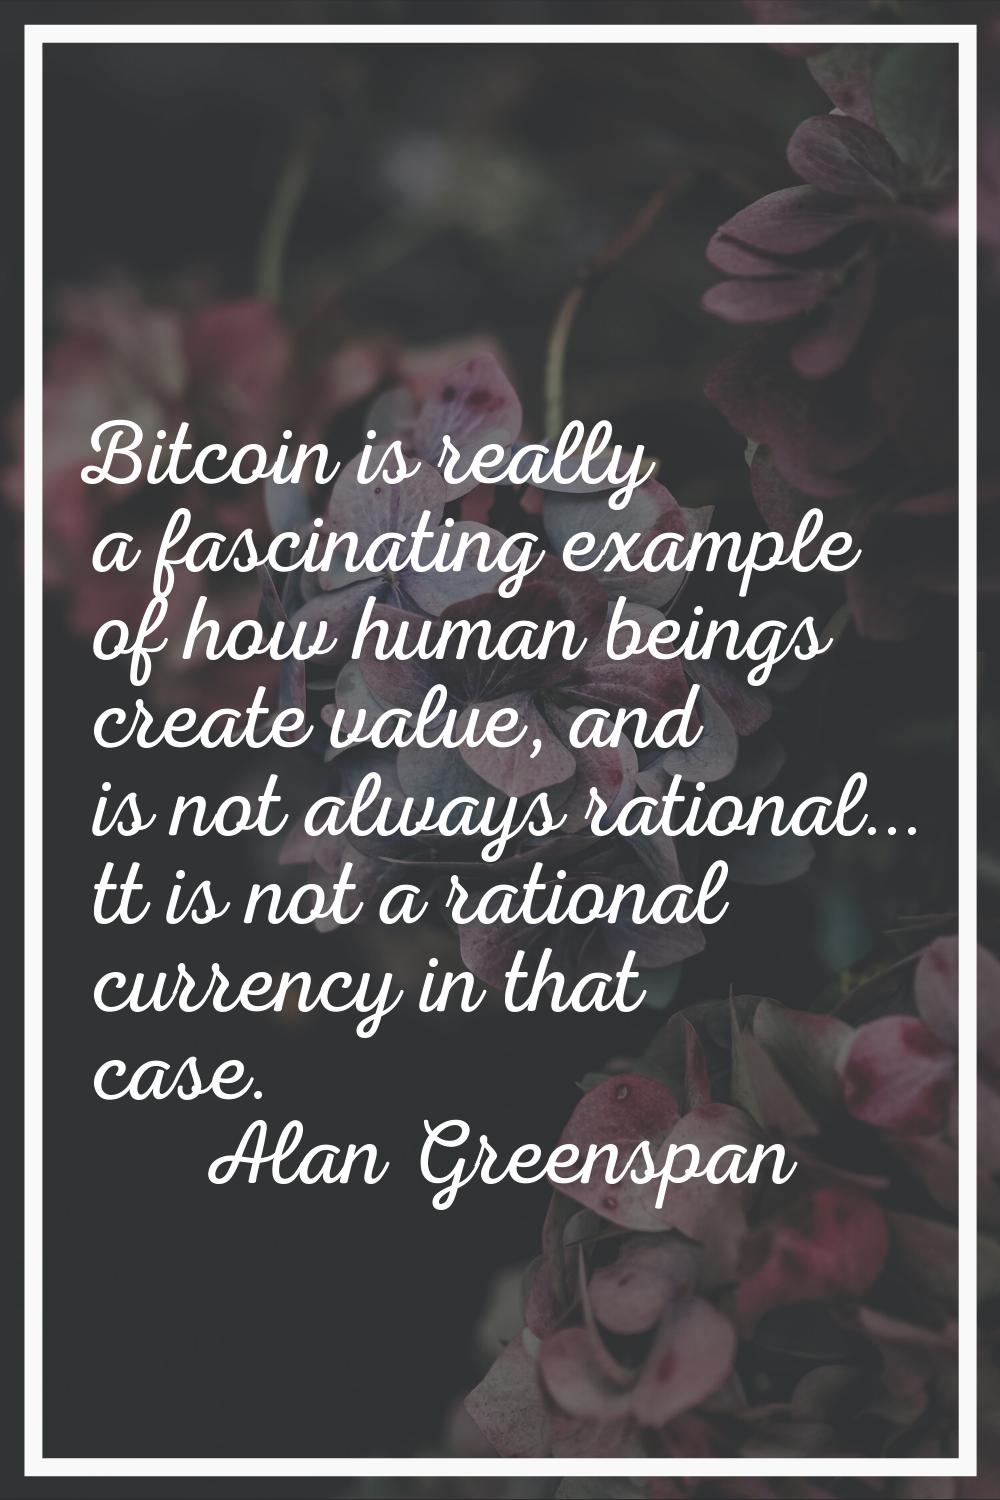 Bitcoin is really a fascinating example of how human beings create value, and is not always rationa